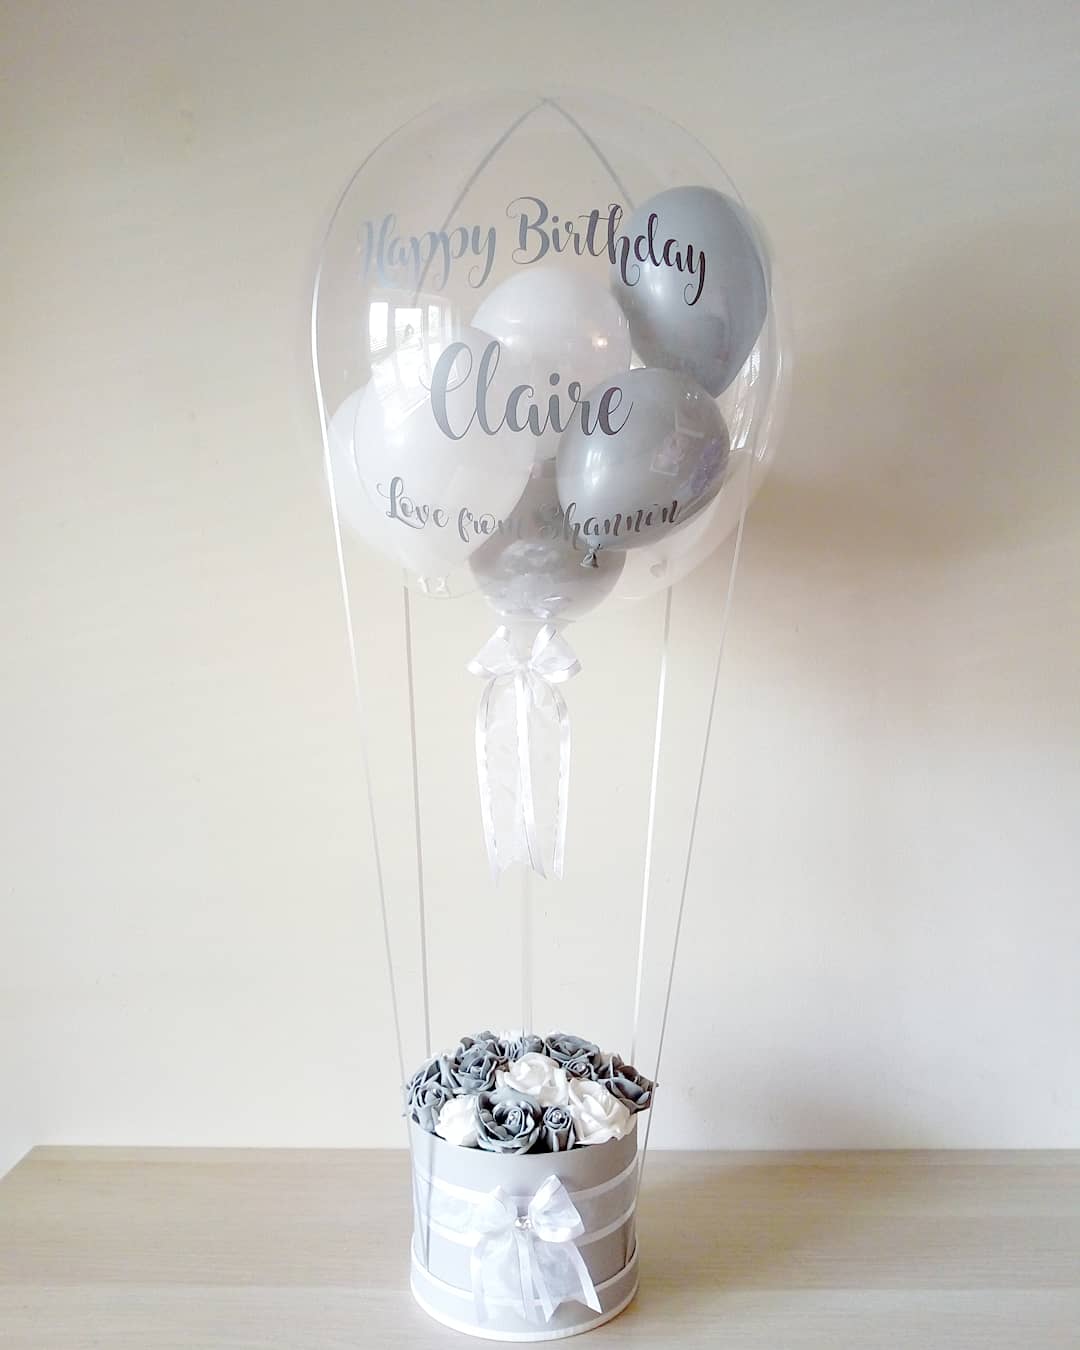 BALLOON BOUQUET WITH CHOCOLATE'S